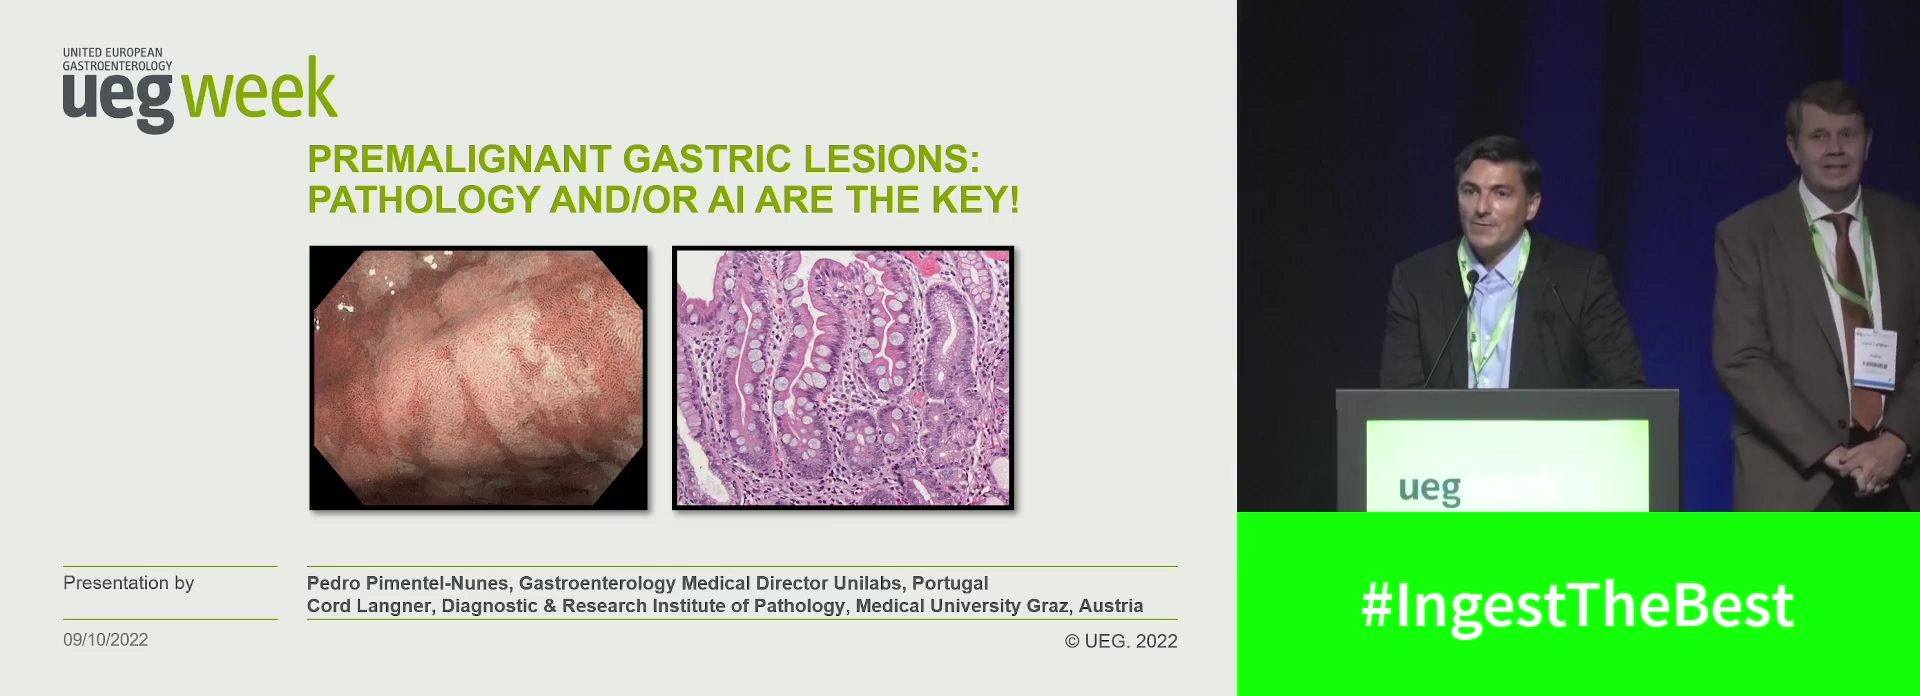 Premalignant gastric lesions: Biopsies are the goldstandard. / AI and machine learning is key